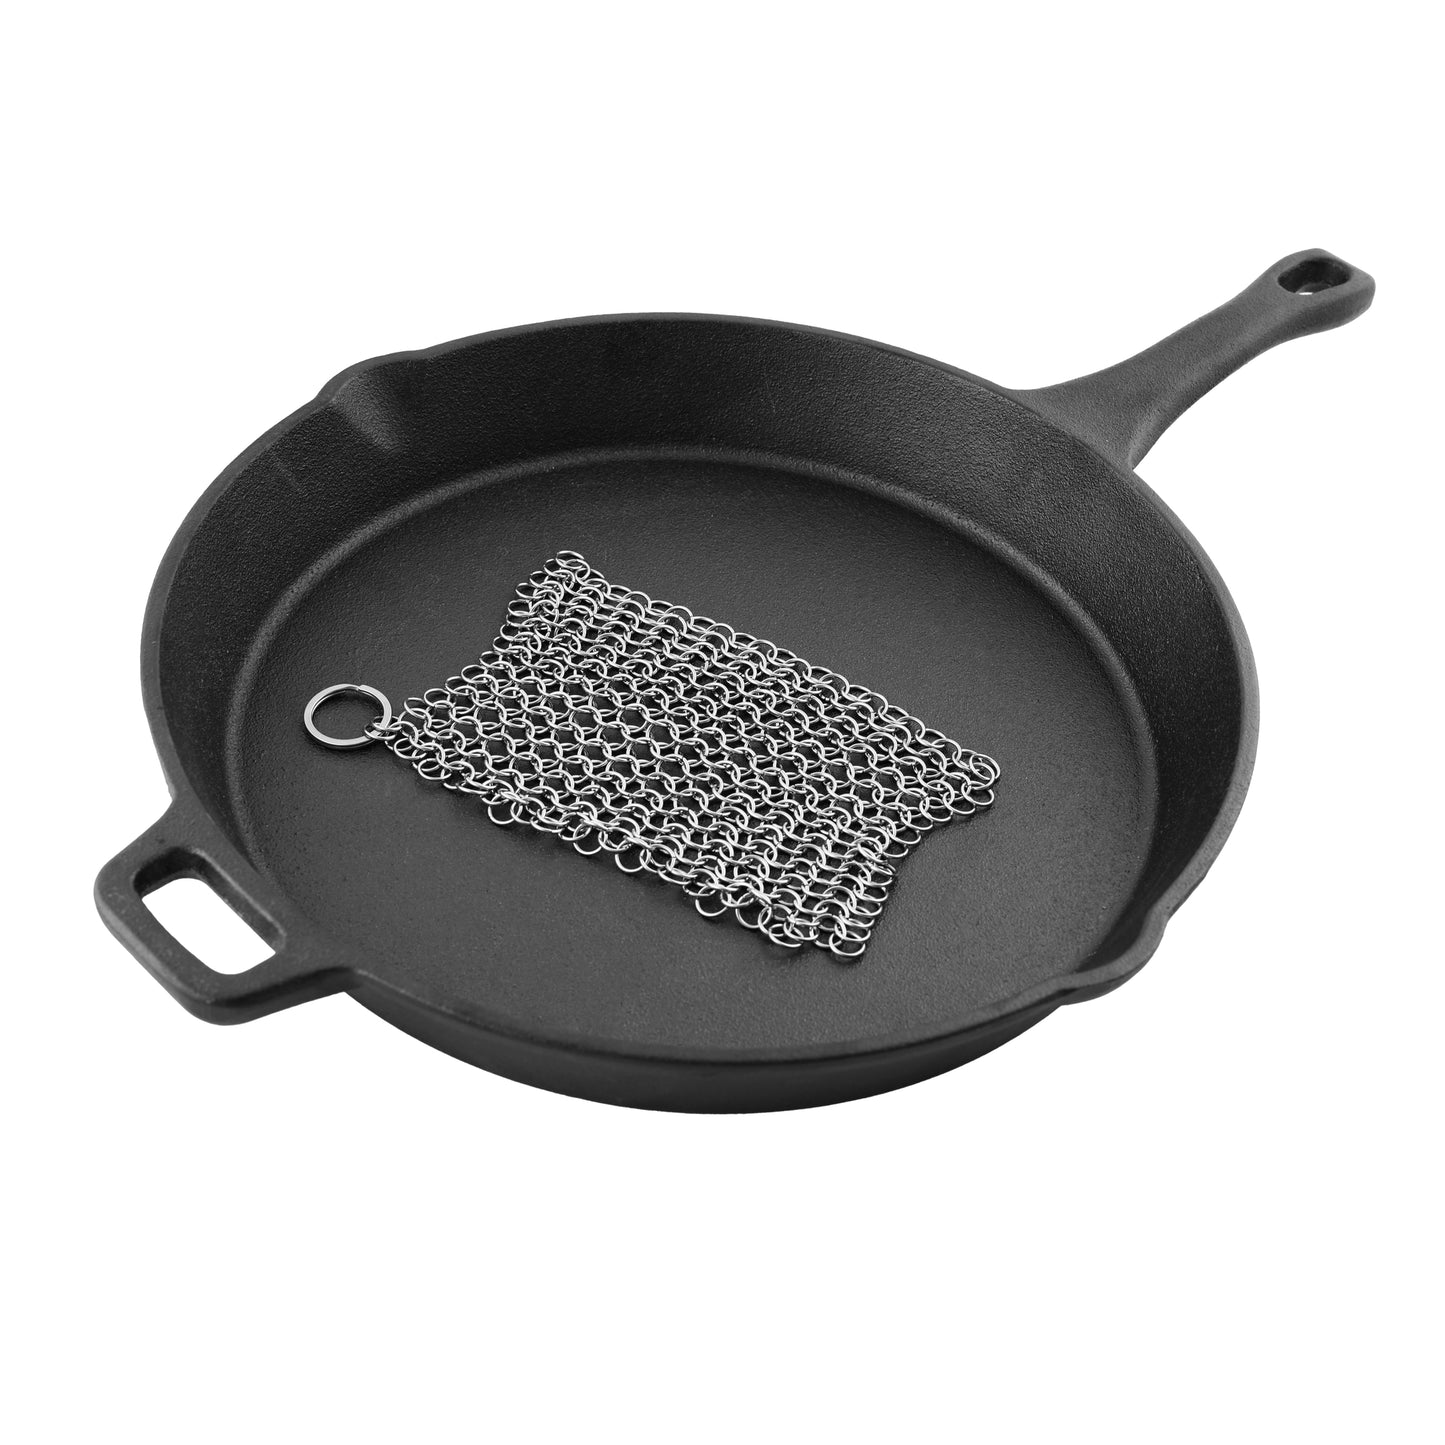 Cast Iron Cleaning Kit – Coghlan's